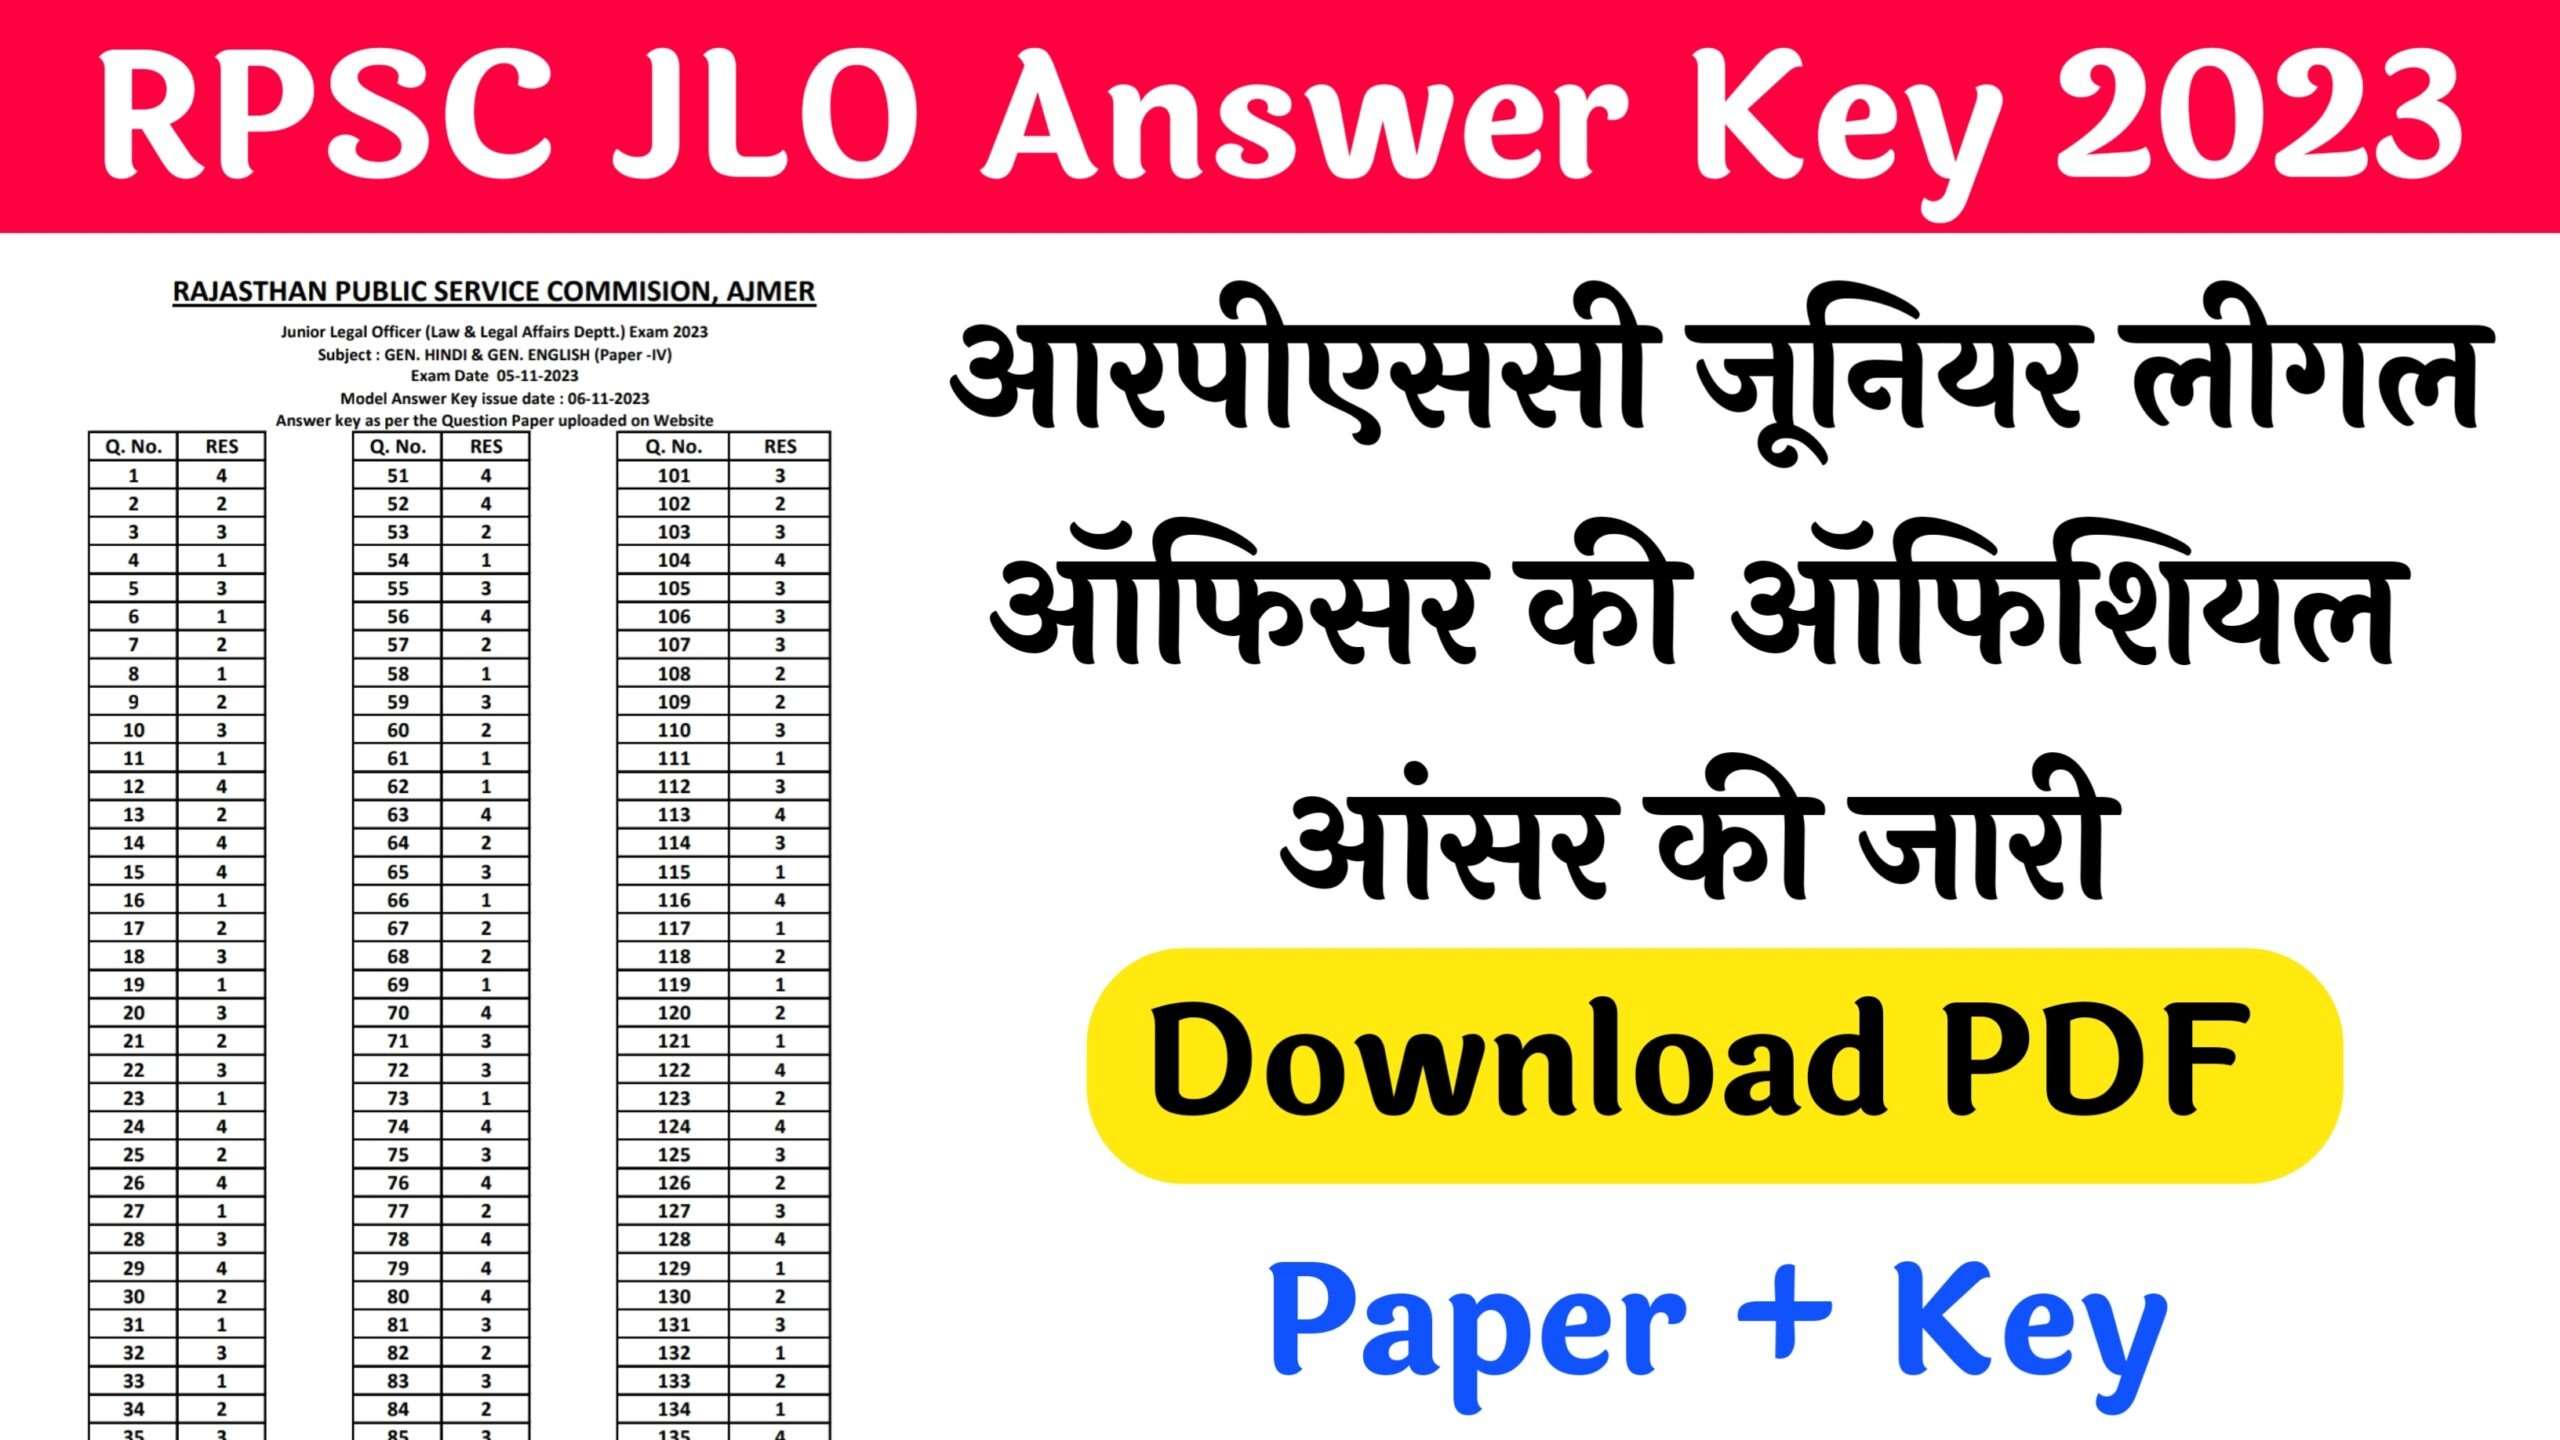 RPSC Releases Answer Key for Junior Legal Officer Recruitment 2023 - Download Here